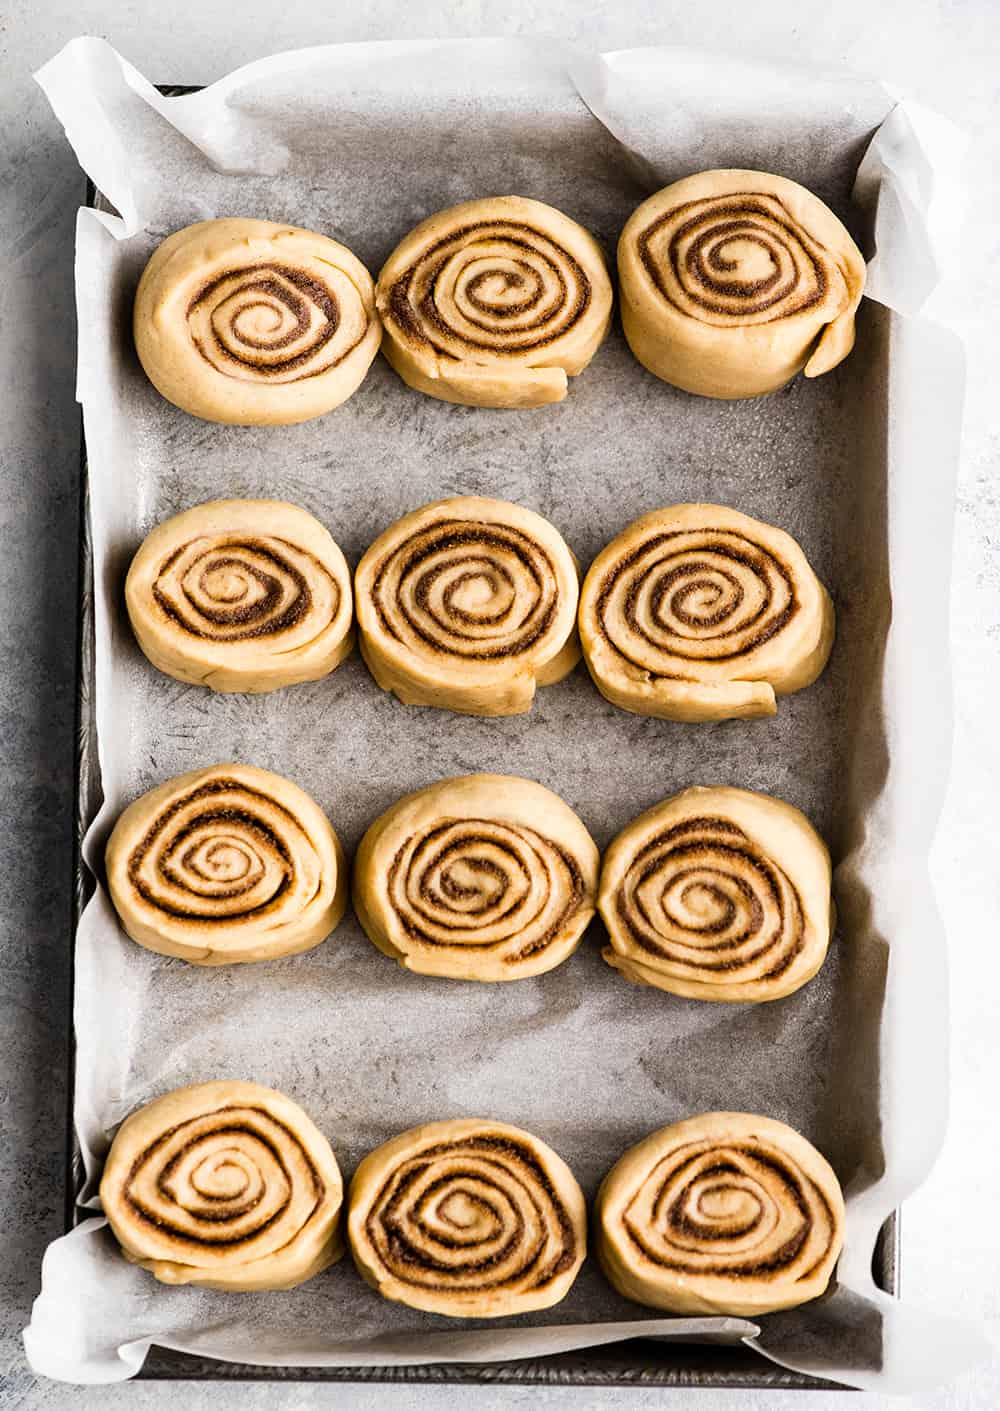 Overhead photo showing how to make cinnamon rolls - rolls in baking pan before rising